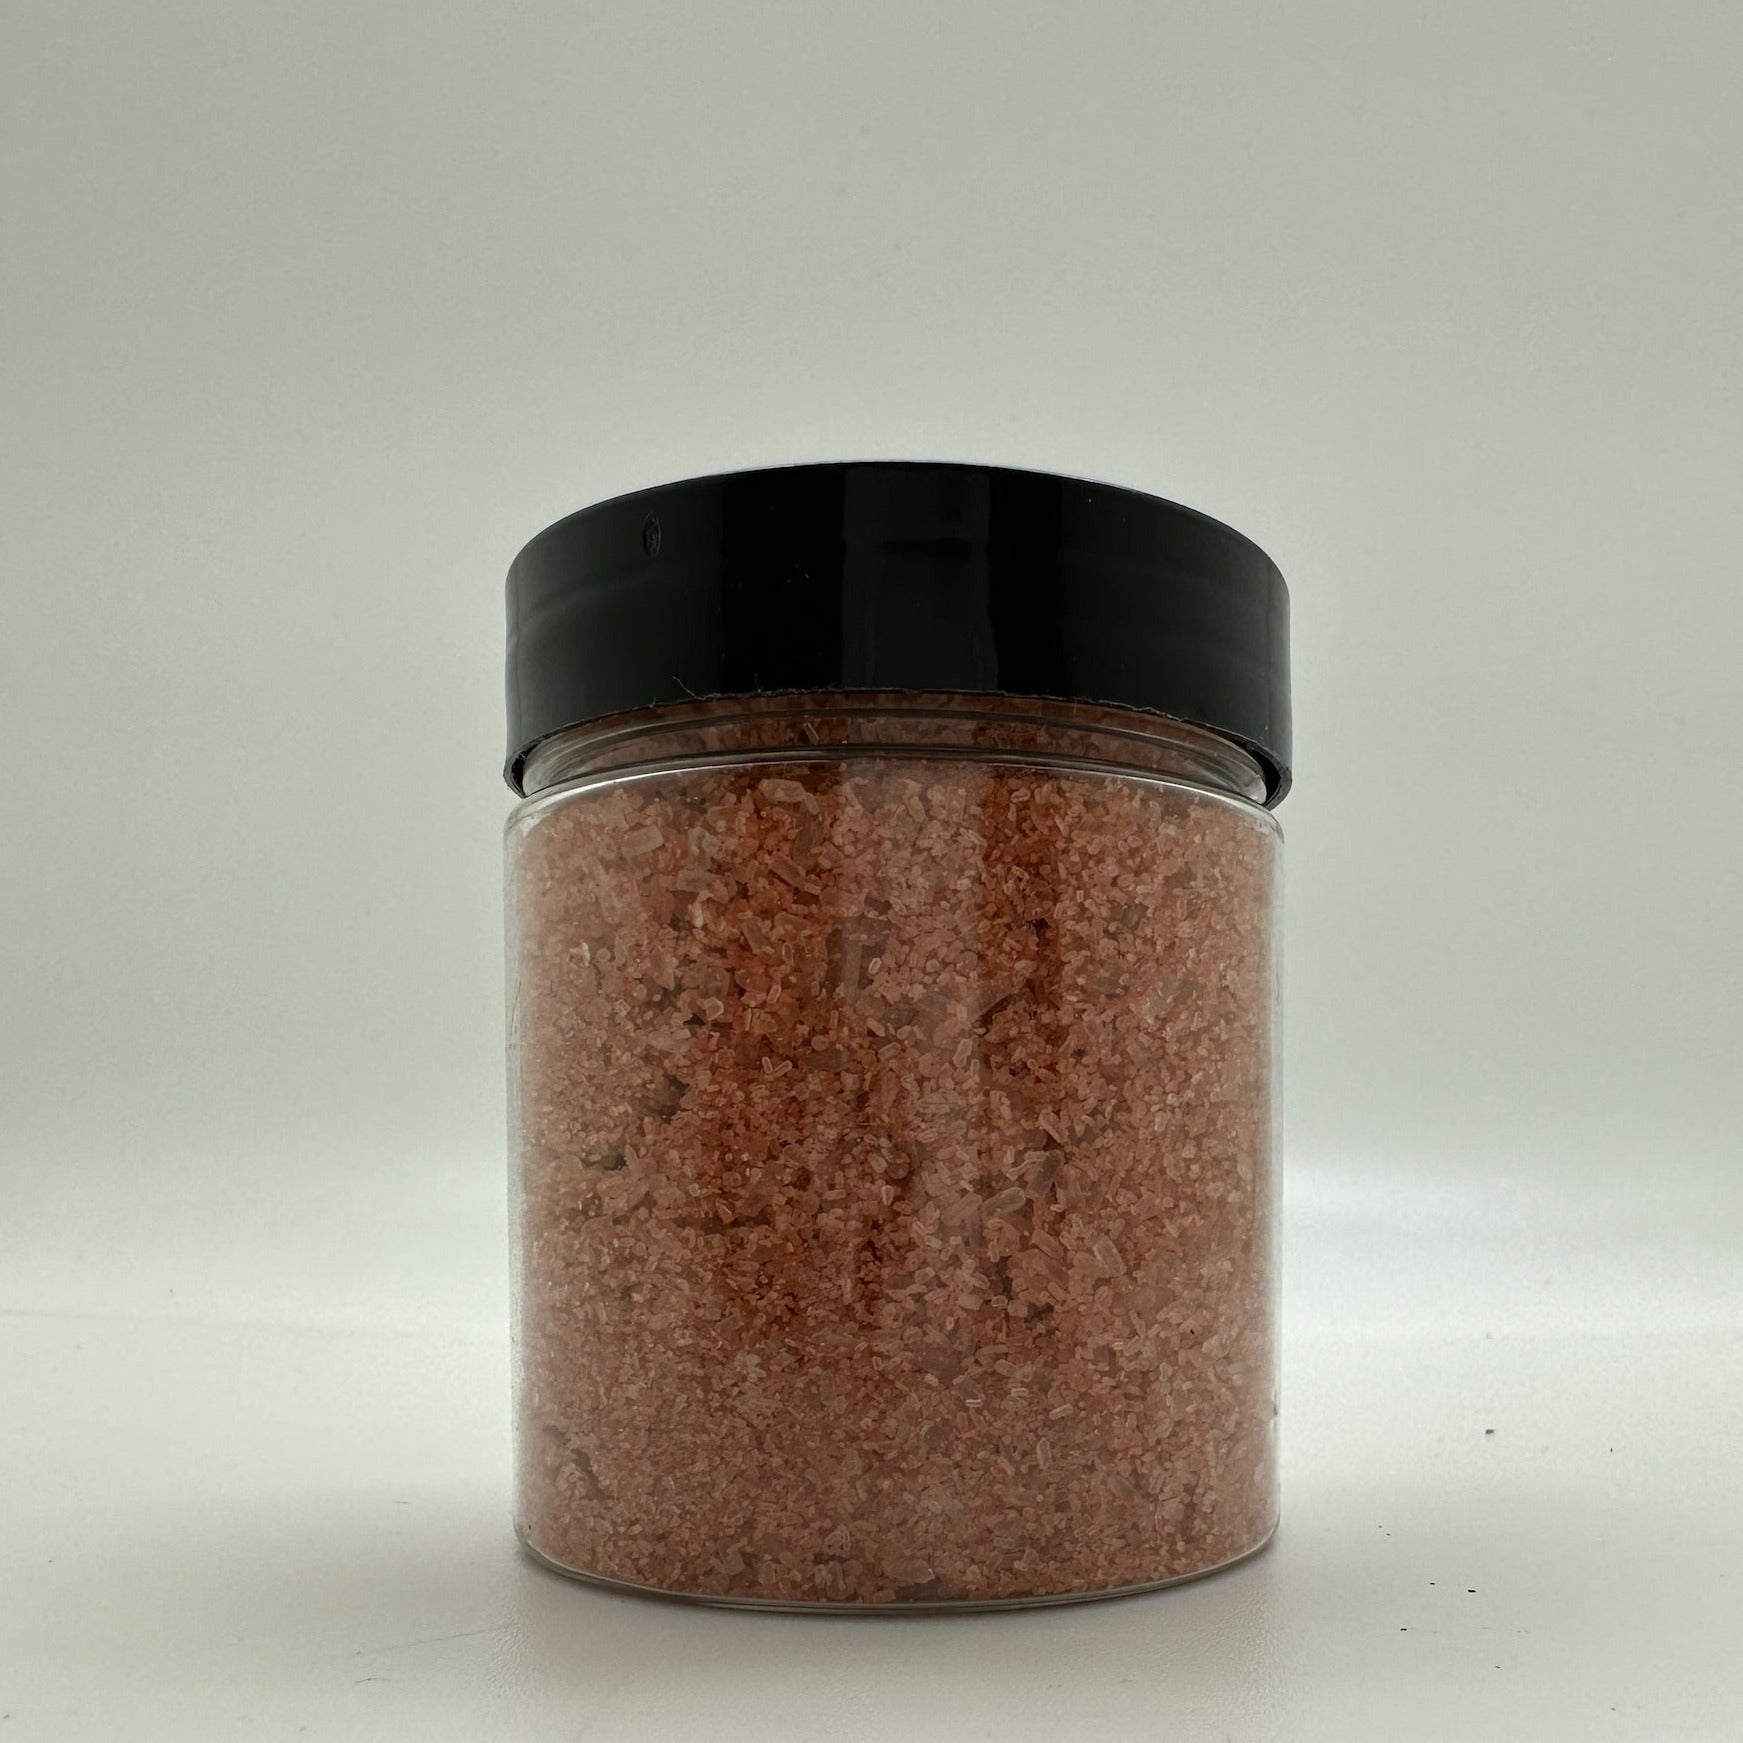 Red colored bath salts in clear jar with black lid.